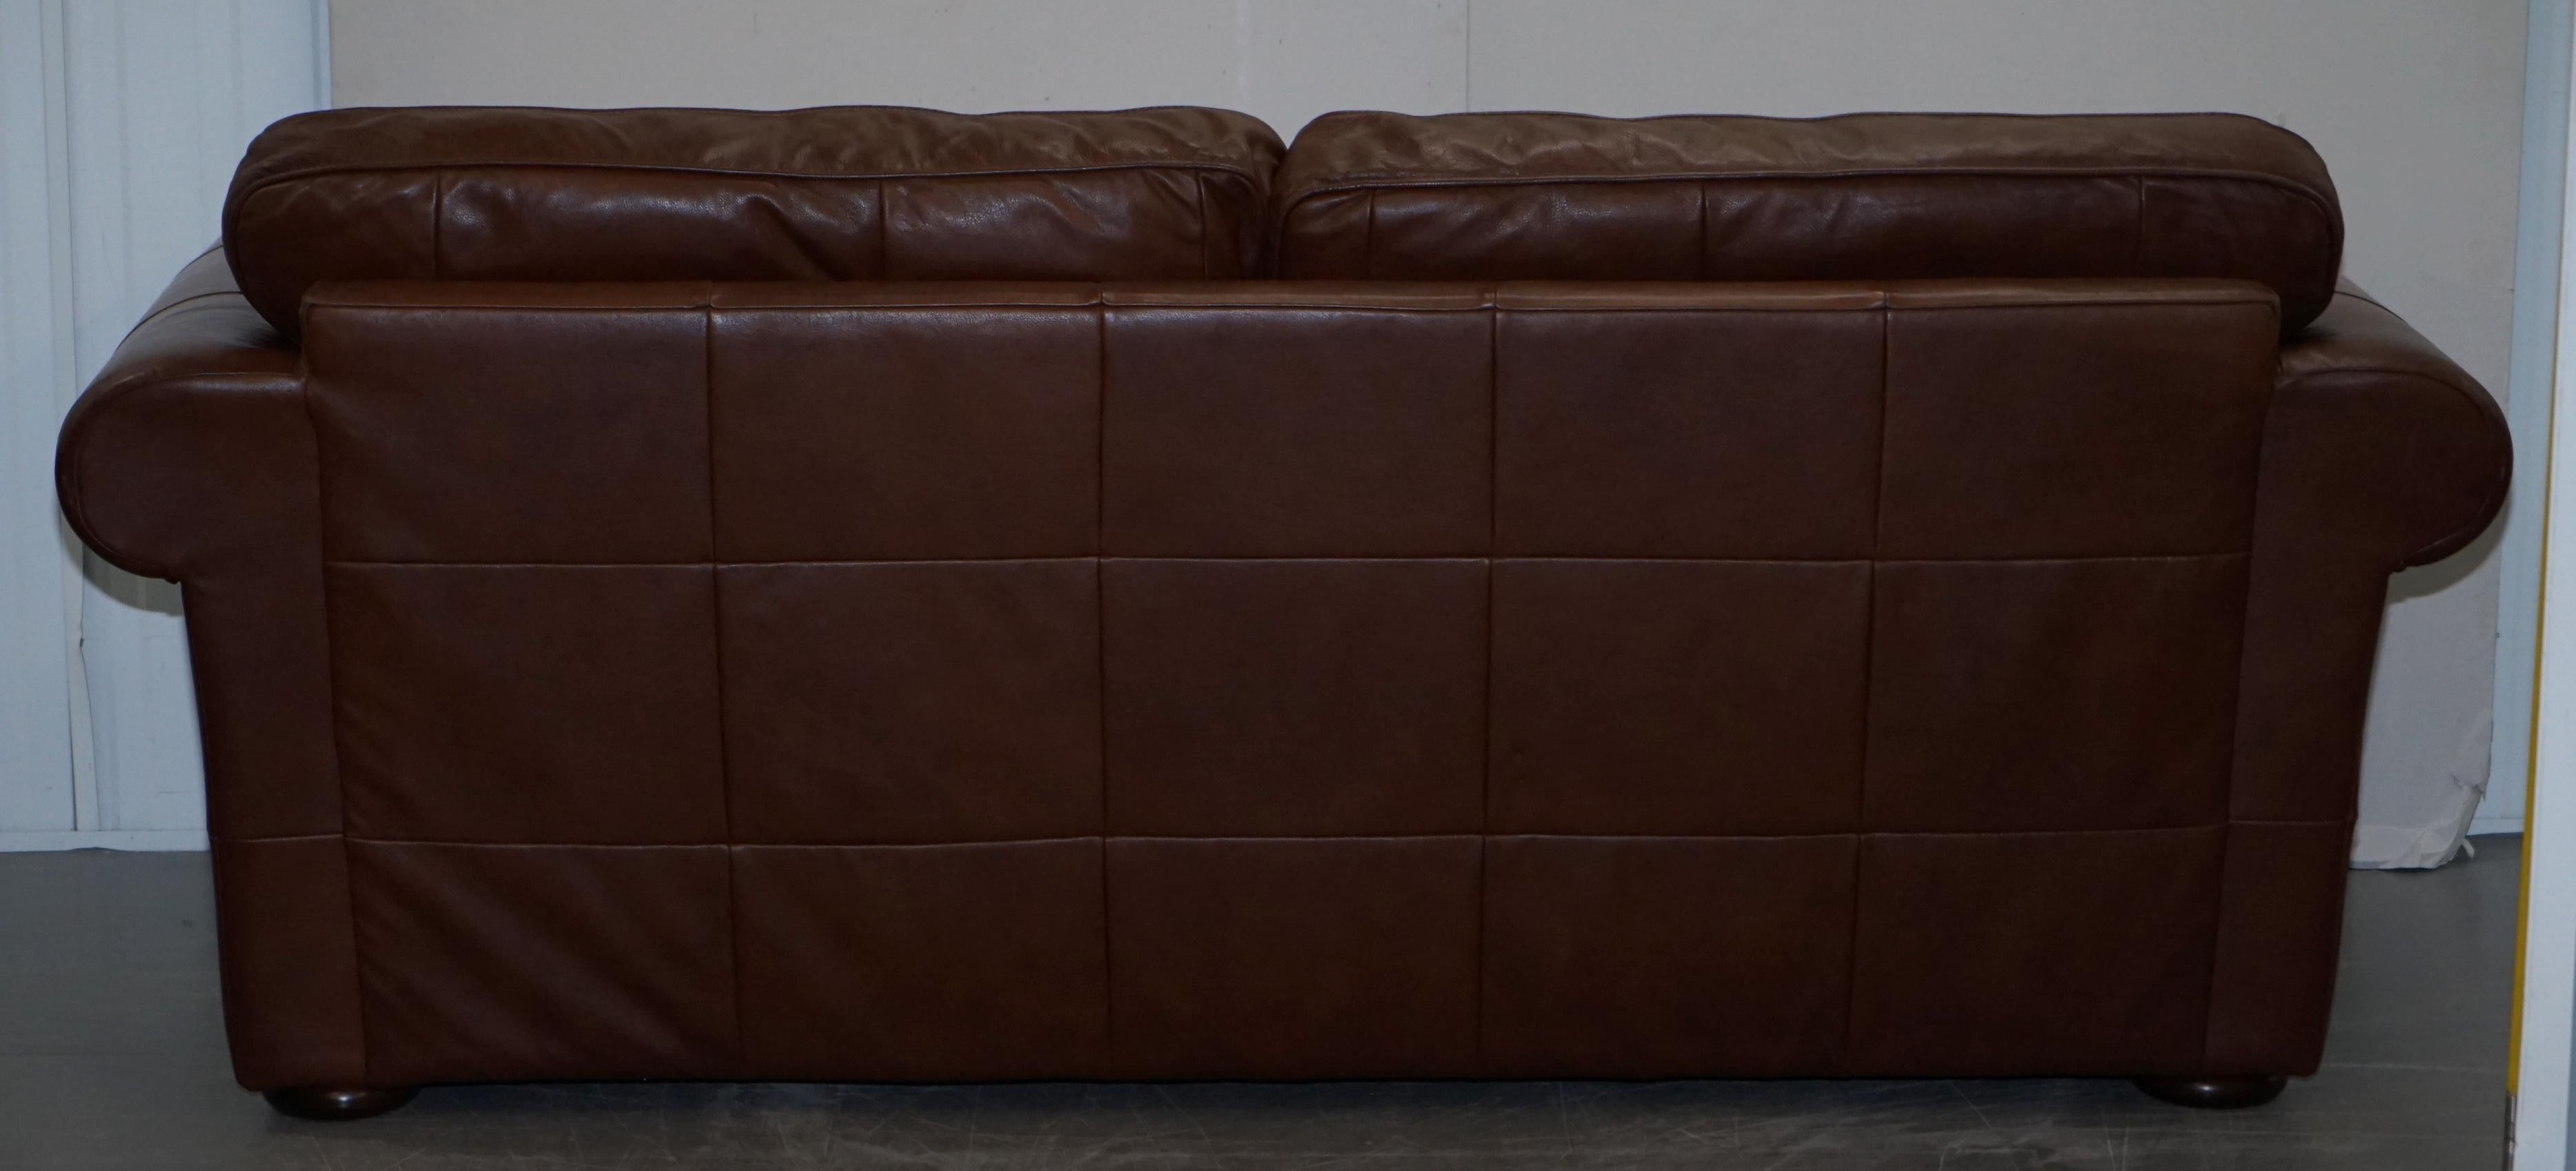 Contemporary Brown Leather Large Comfortable Three Seat Sofa Part of Large Suite 7